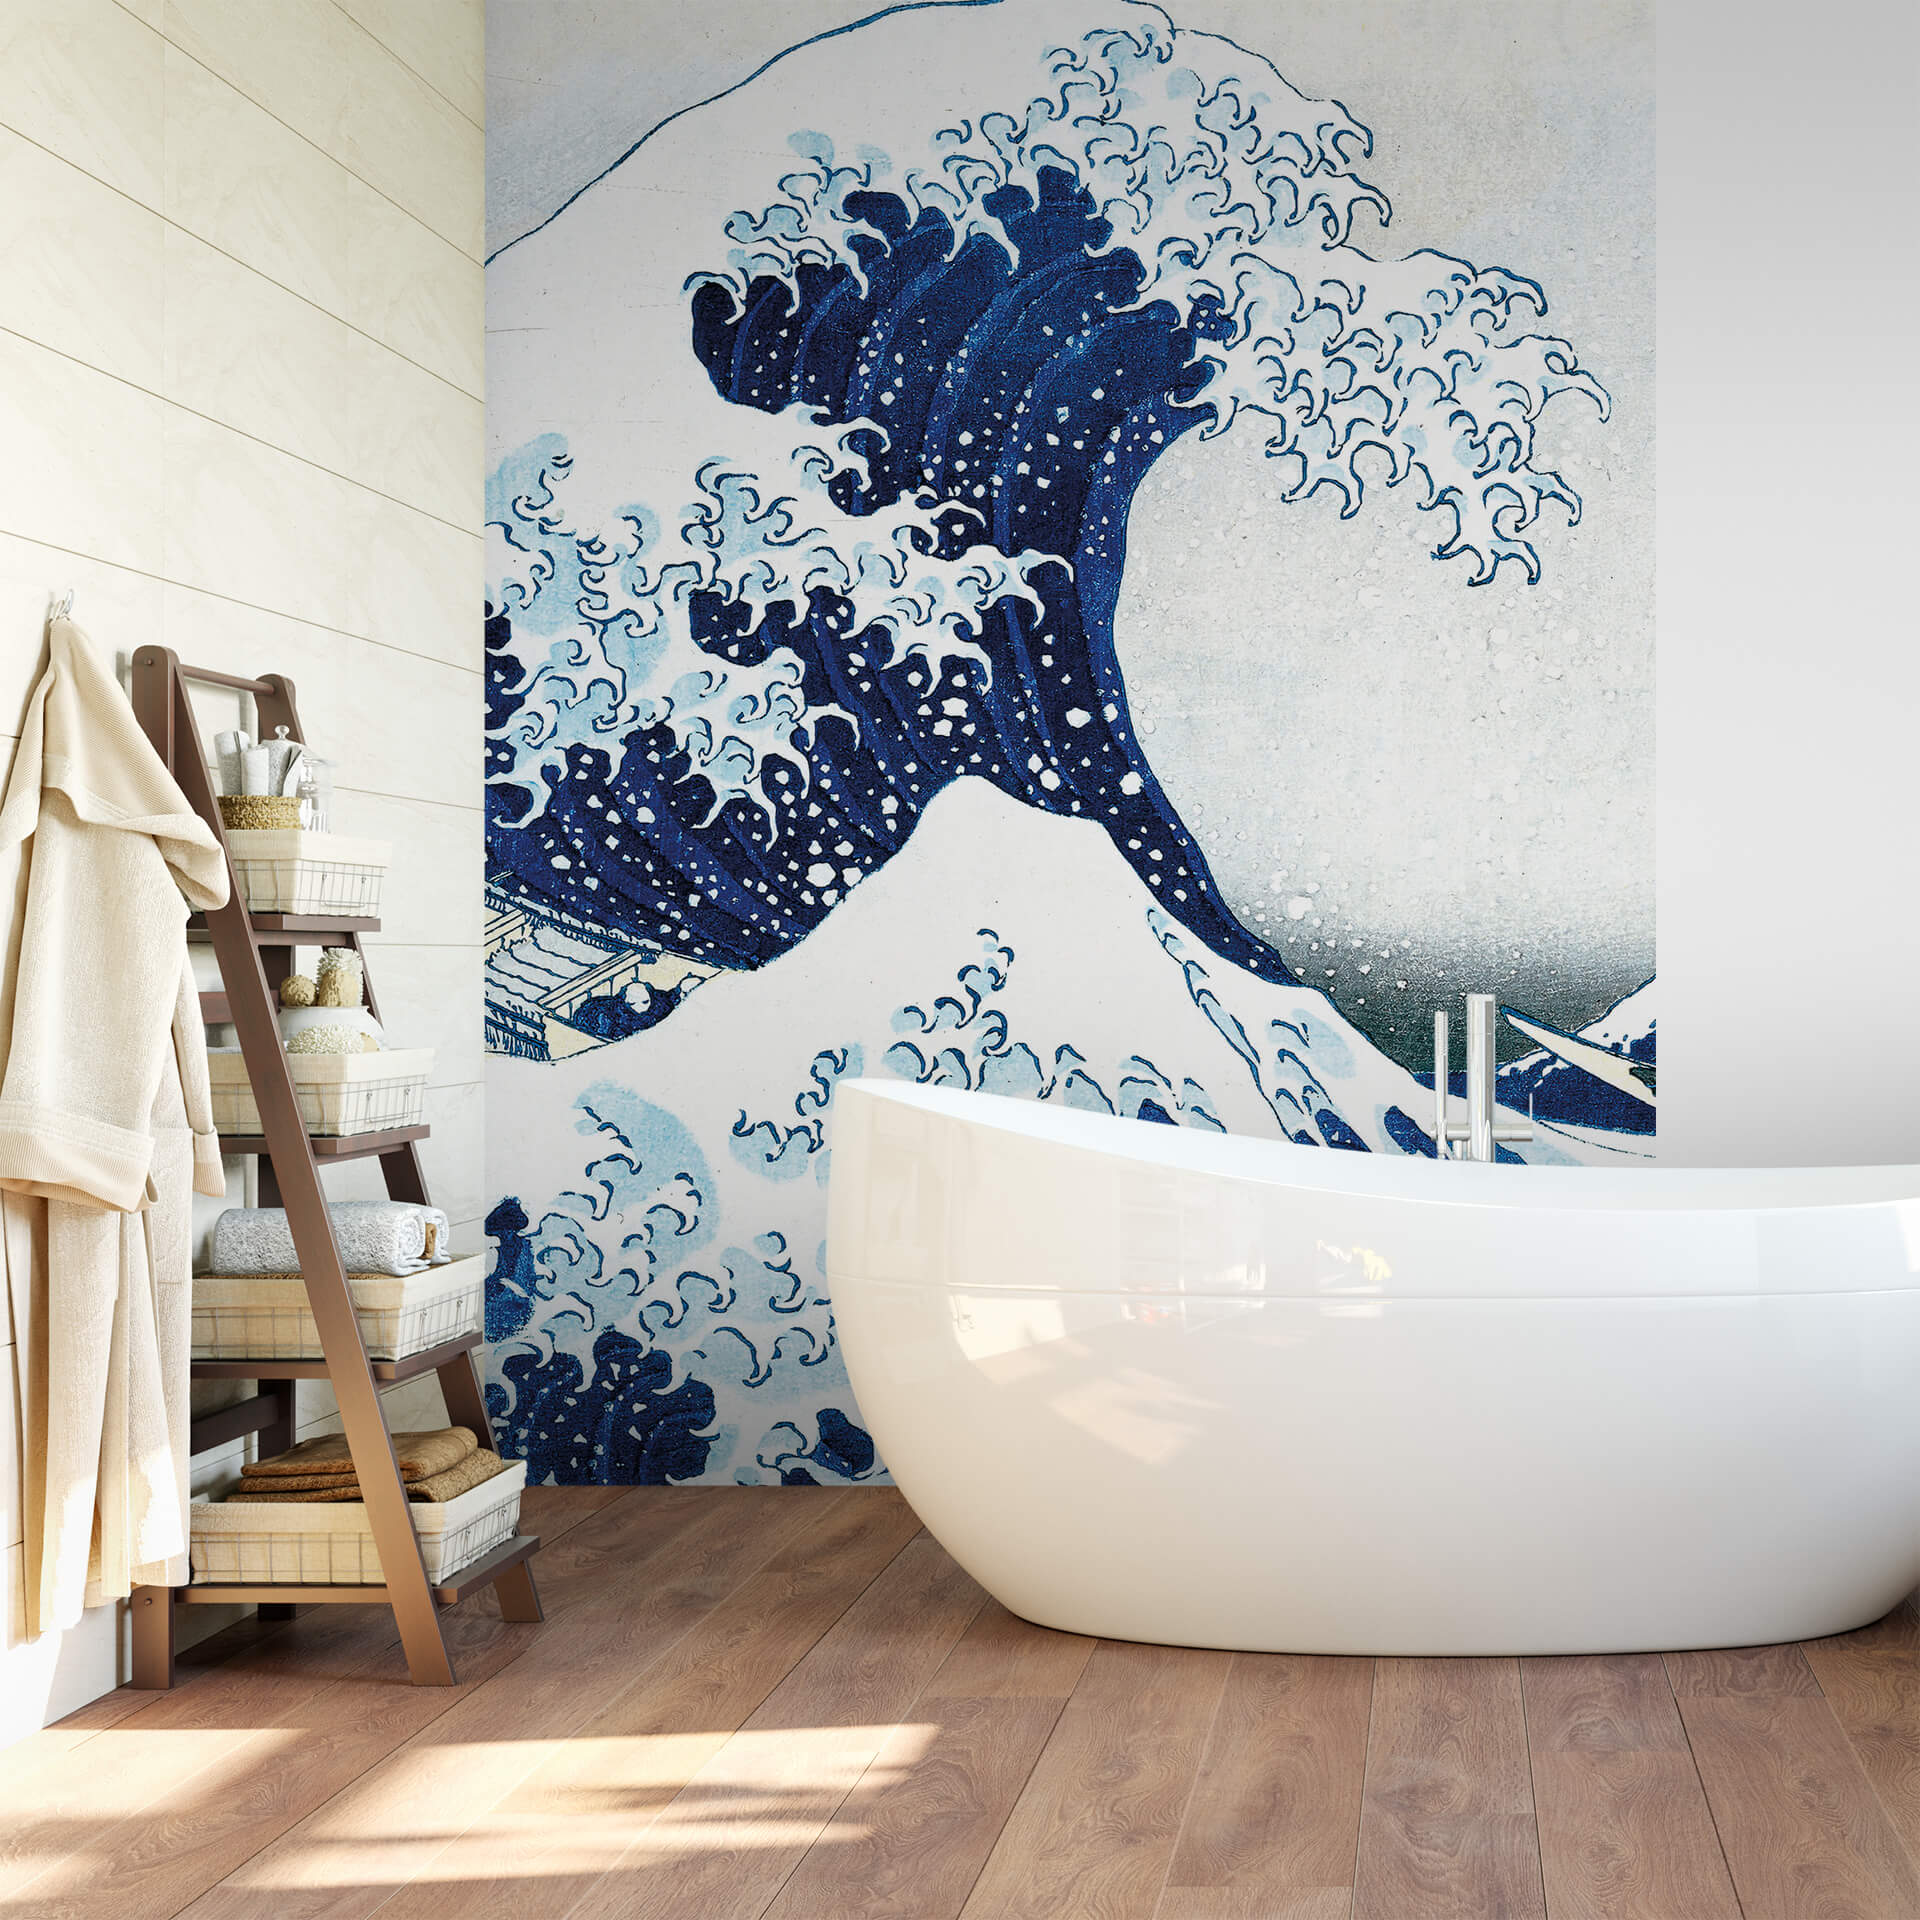 The Great Wave off Kanagawa Waves HD Vaporwave Wallpapers  HD Wallpapers   ID 47126